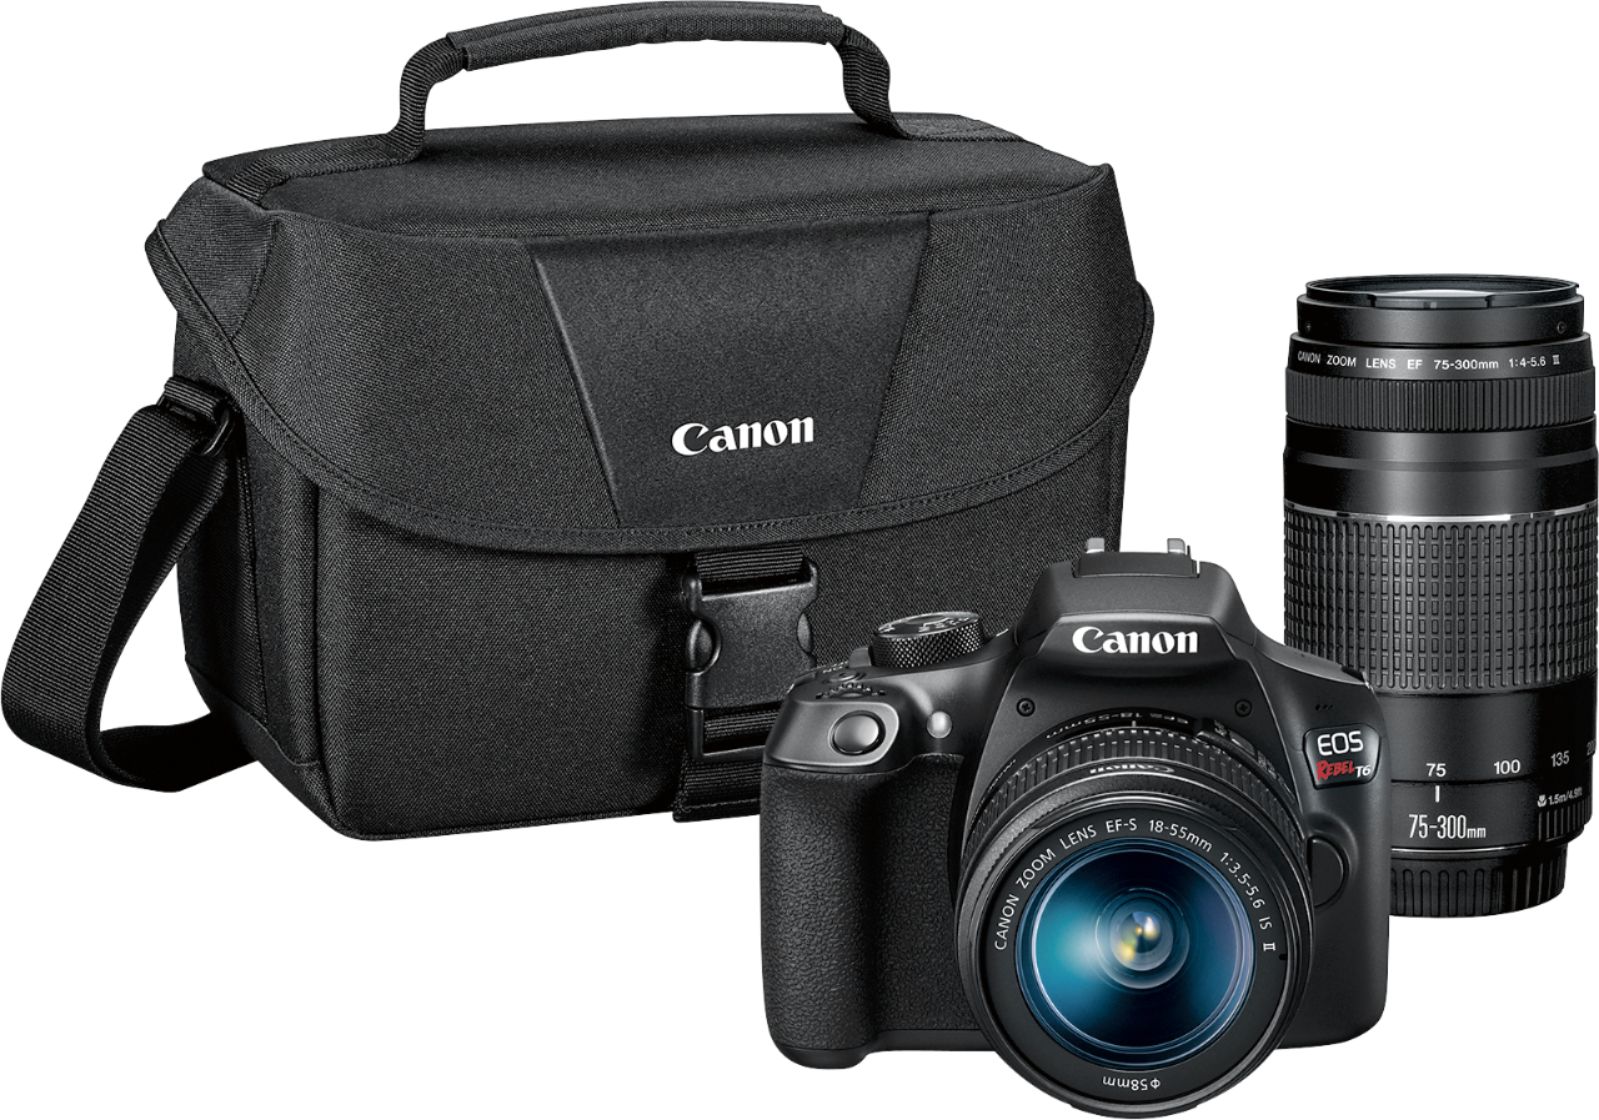 Canon EOS Rebel T6 DSLR Two Lens Kit with EF-S 18-55mm IS II and EF 75-300mm III lens Black 1159C008 Best Buy